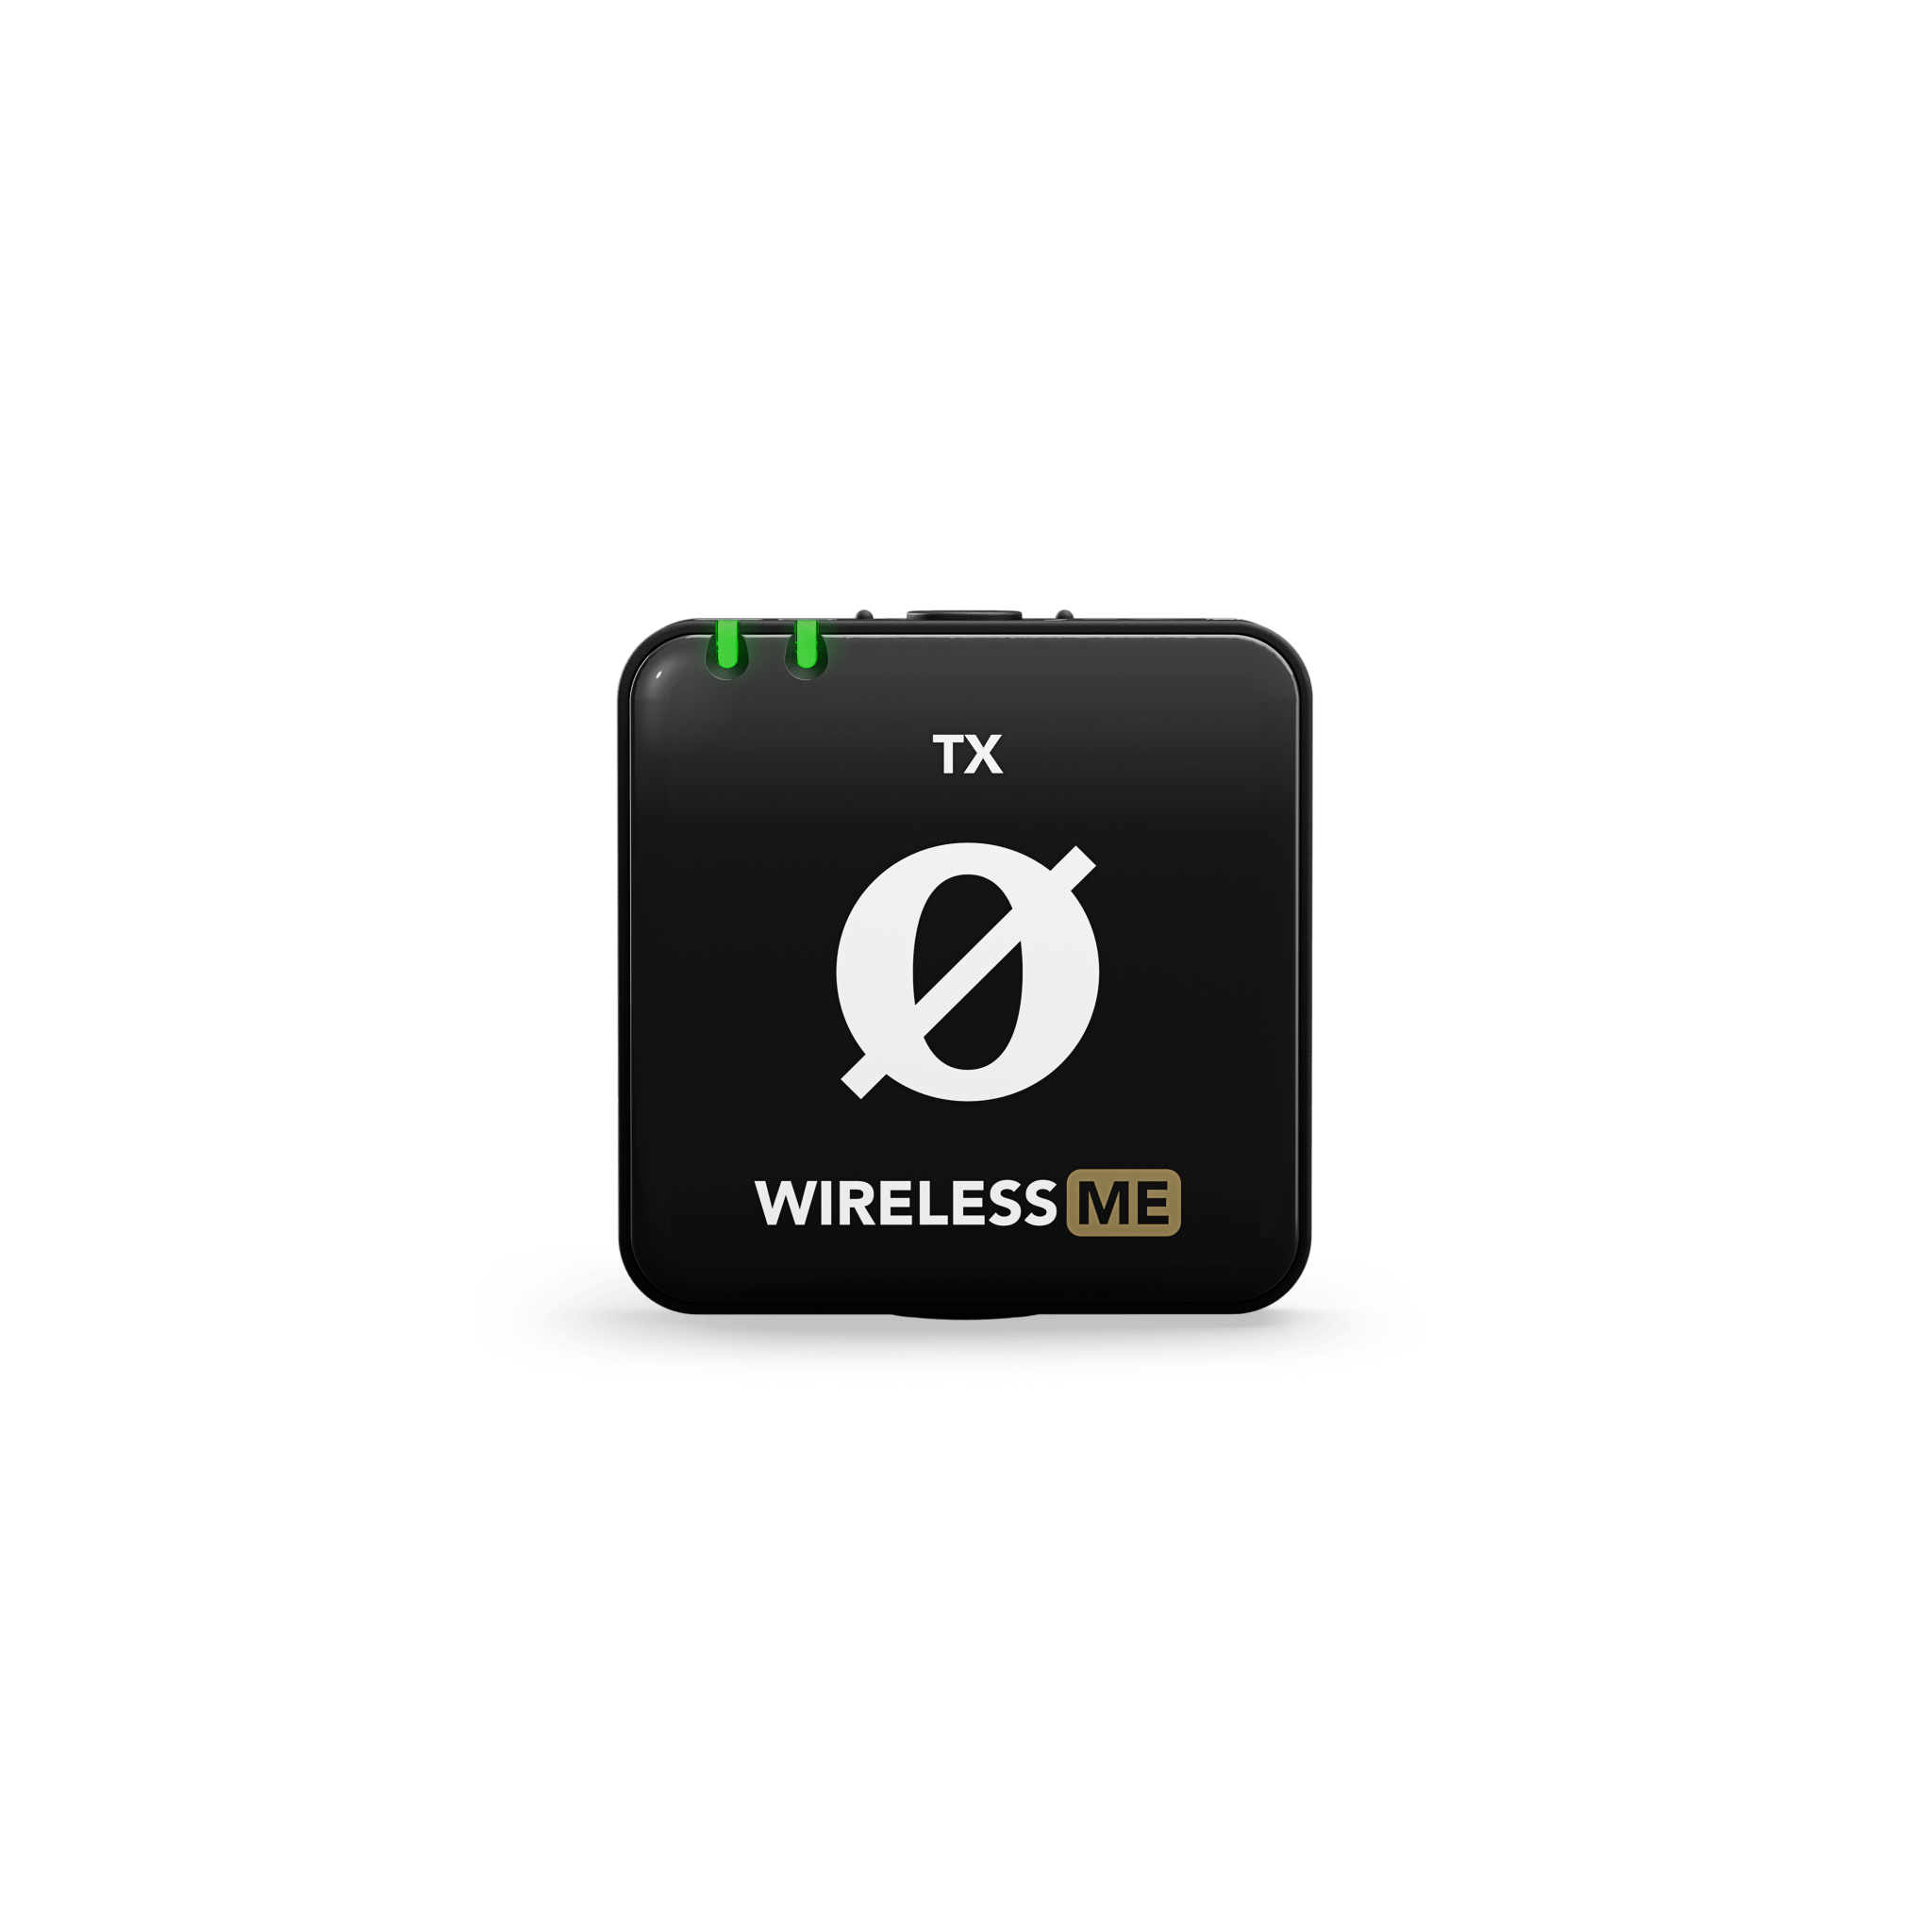 Rode Wireless ME TX Microphone System - B&C Camera